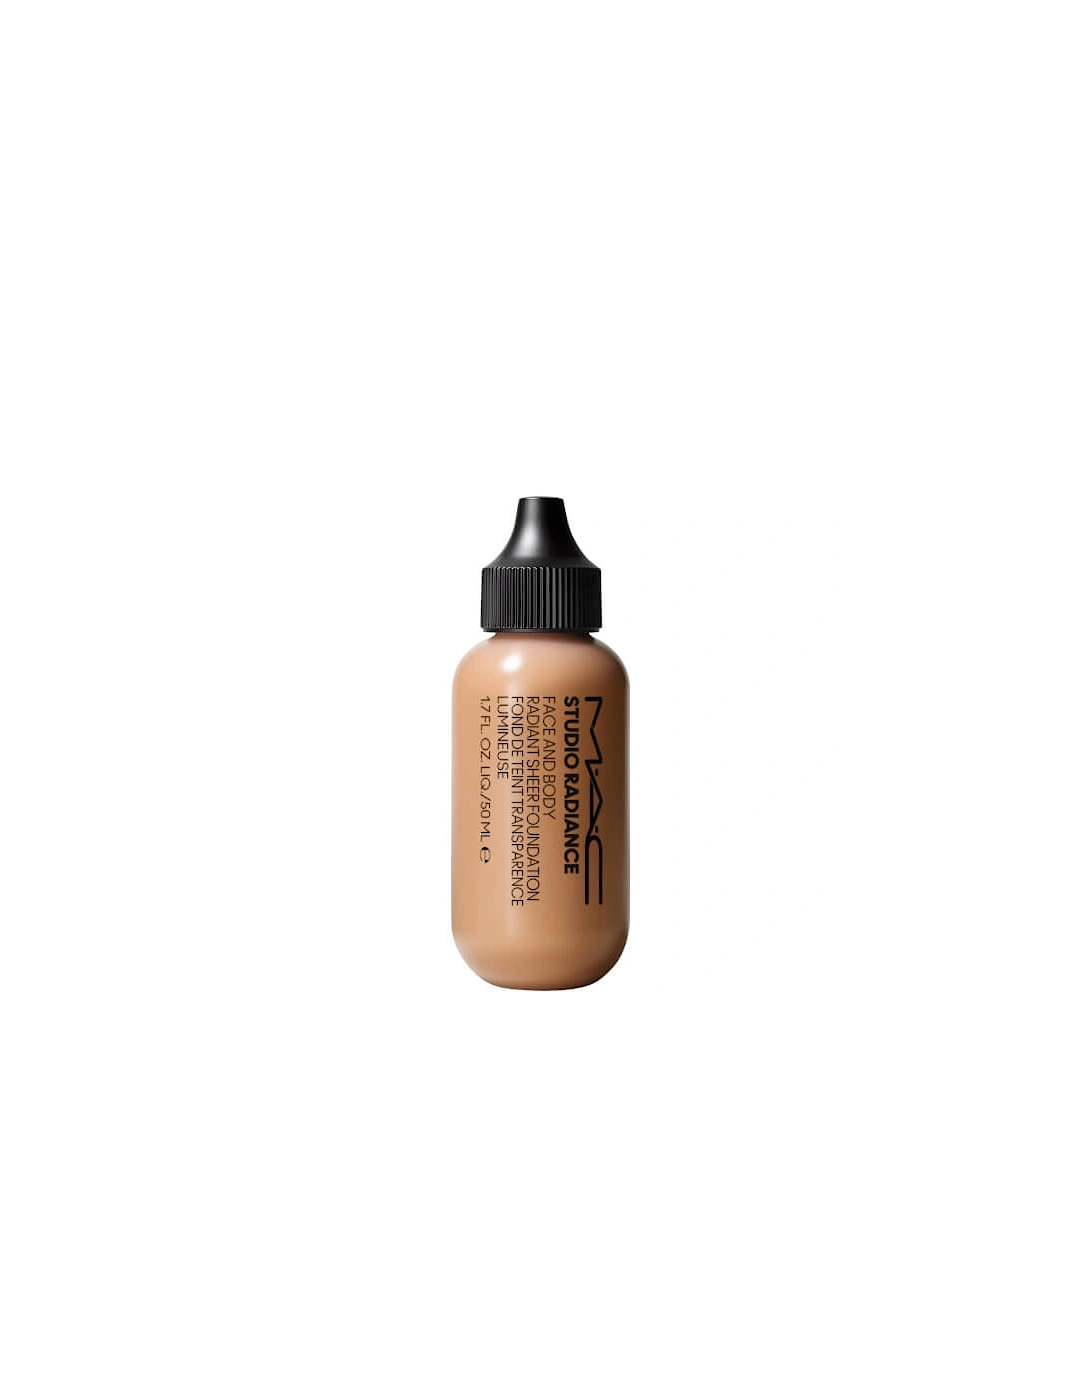 Studio Face and Body Radiant Sheer Foundation - N2, 2 of 1